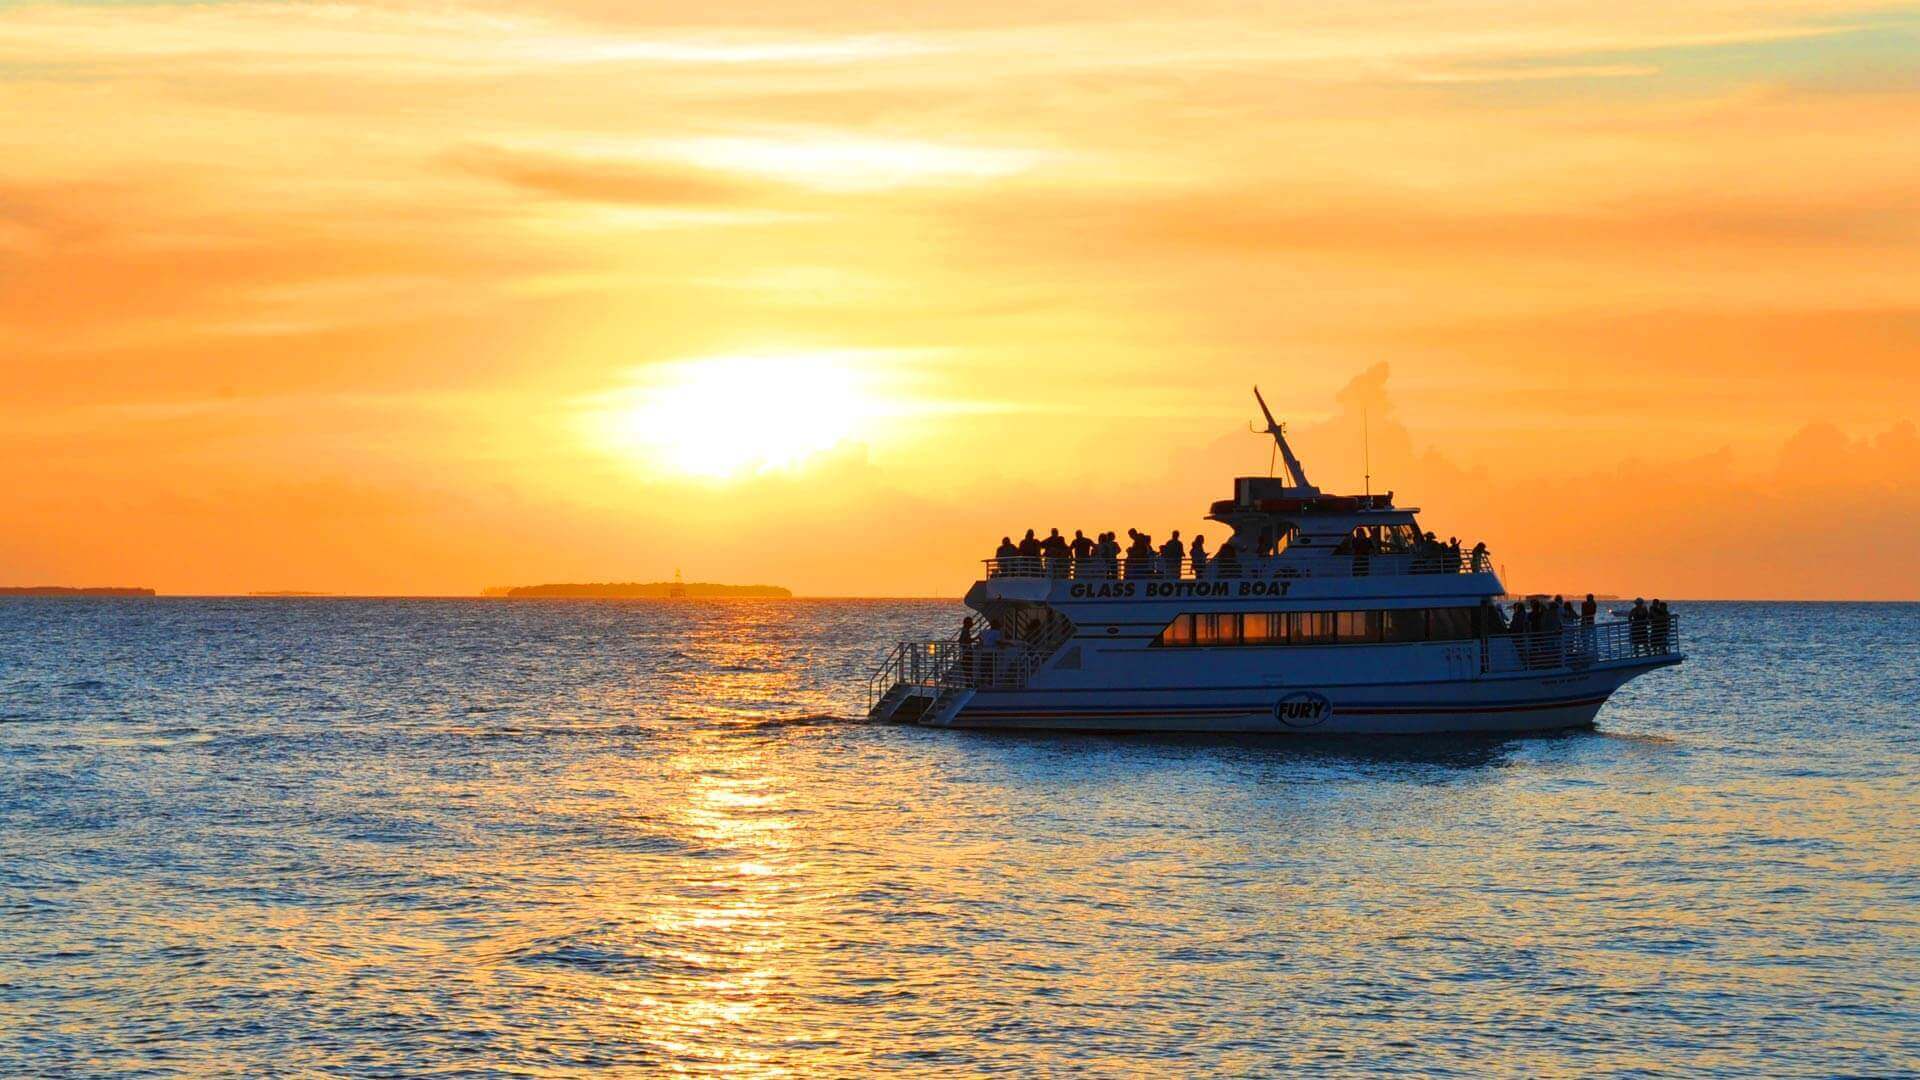 Tourists aboard Fury's glass bottom boat with sunset in background